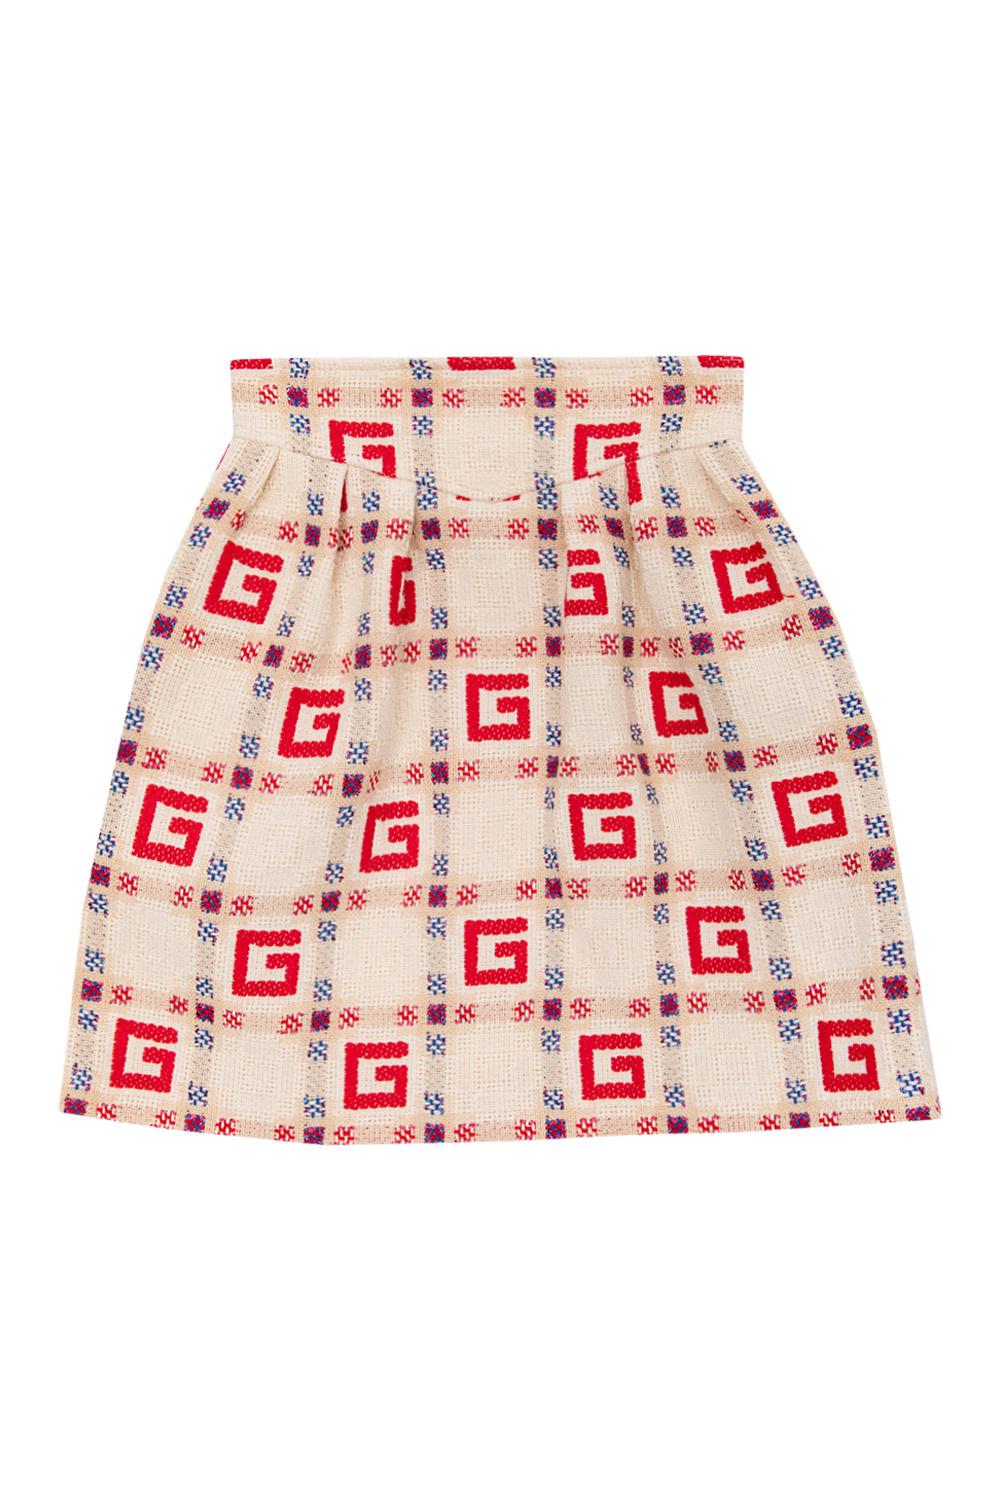 gucci tailored Kids Patterned skirt